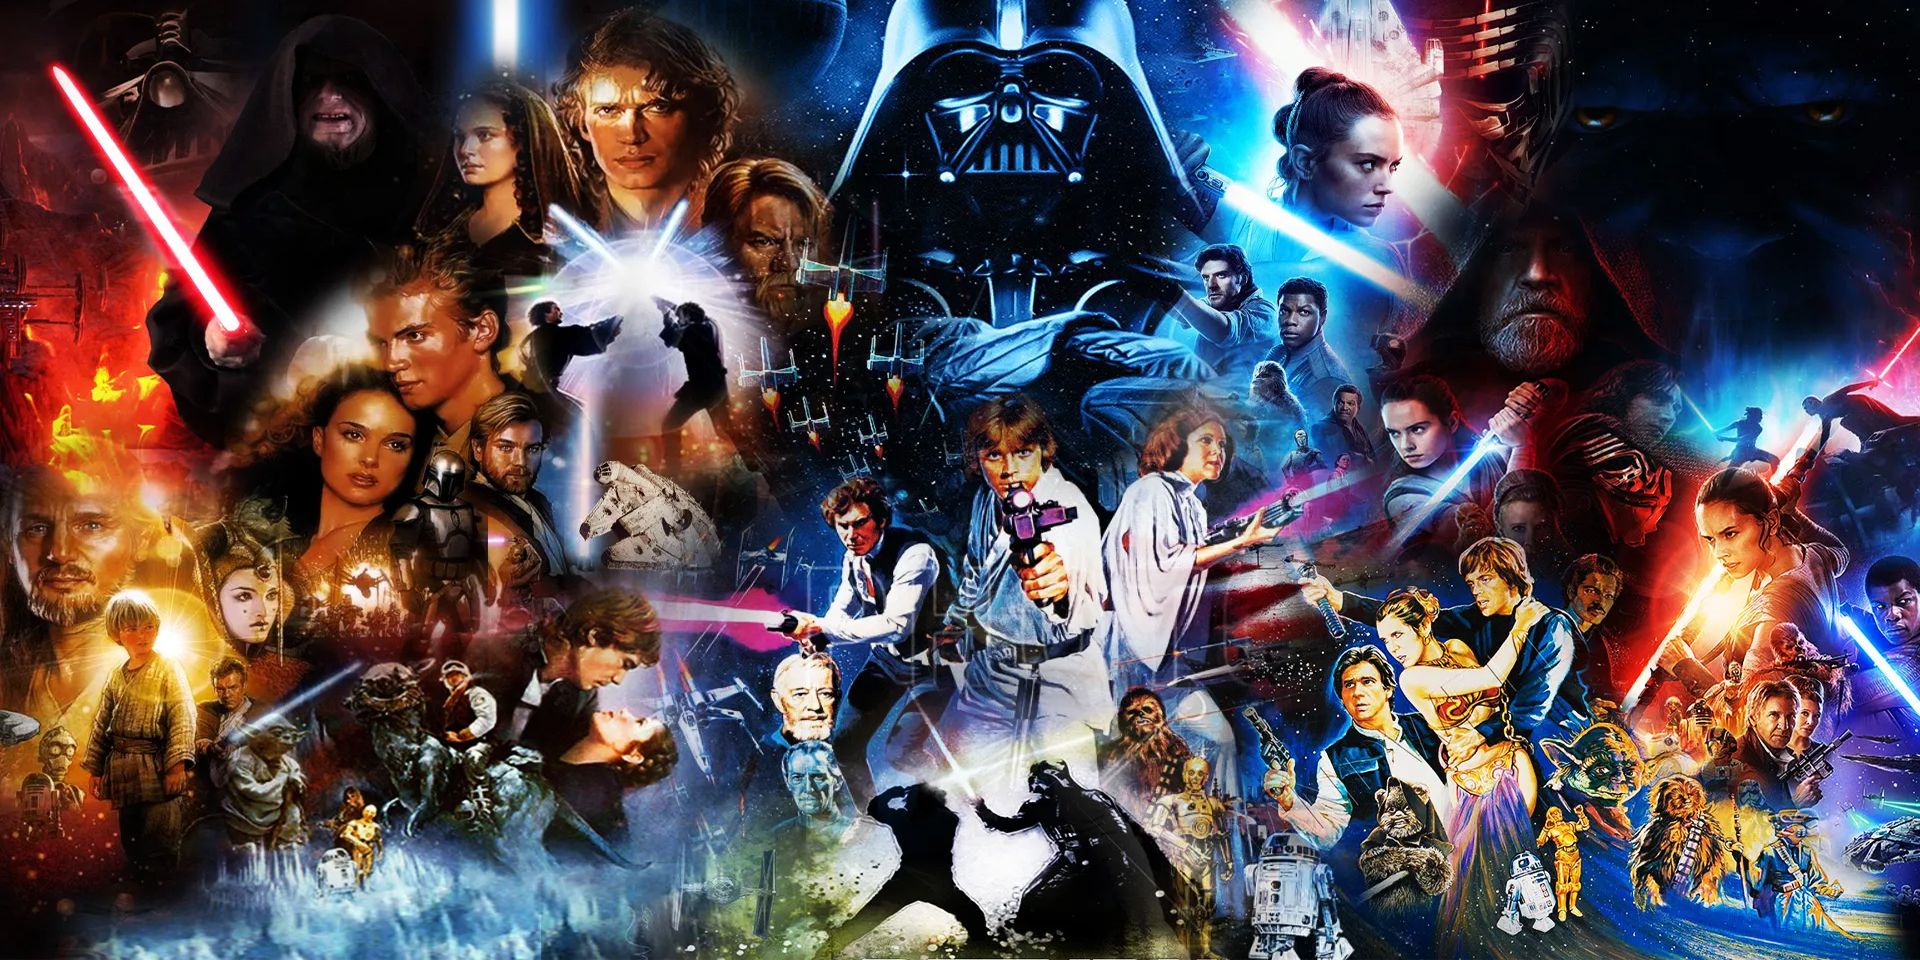 Star Wars Movies and Shows in Chronological Order